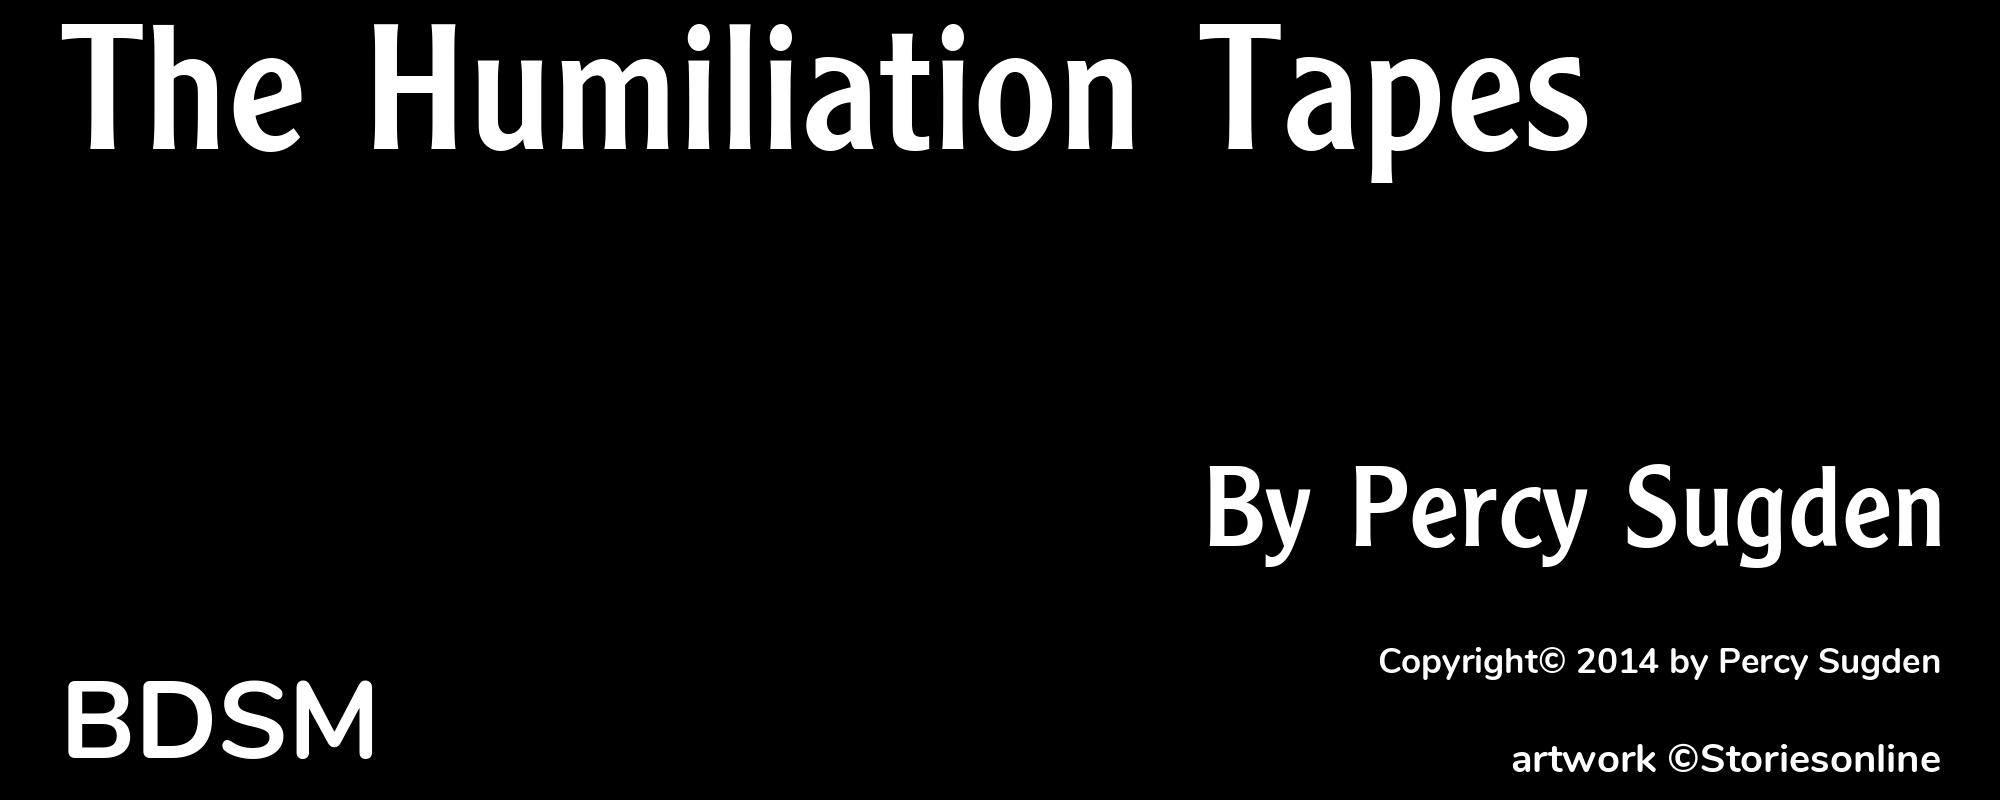 The Humiliation Tapes - Cover